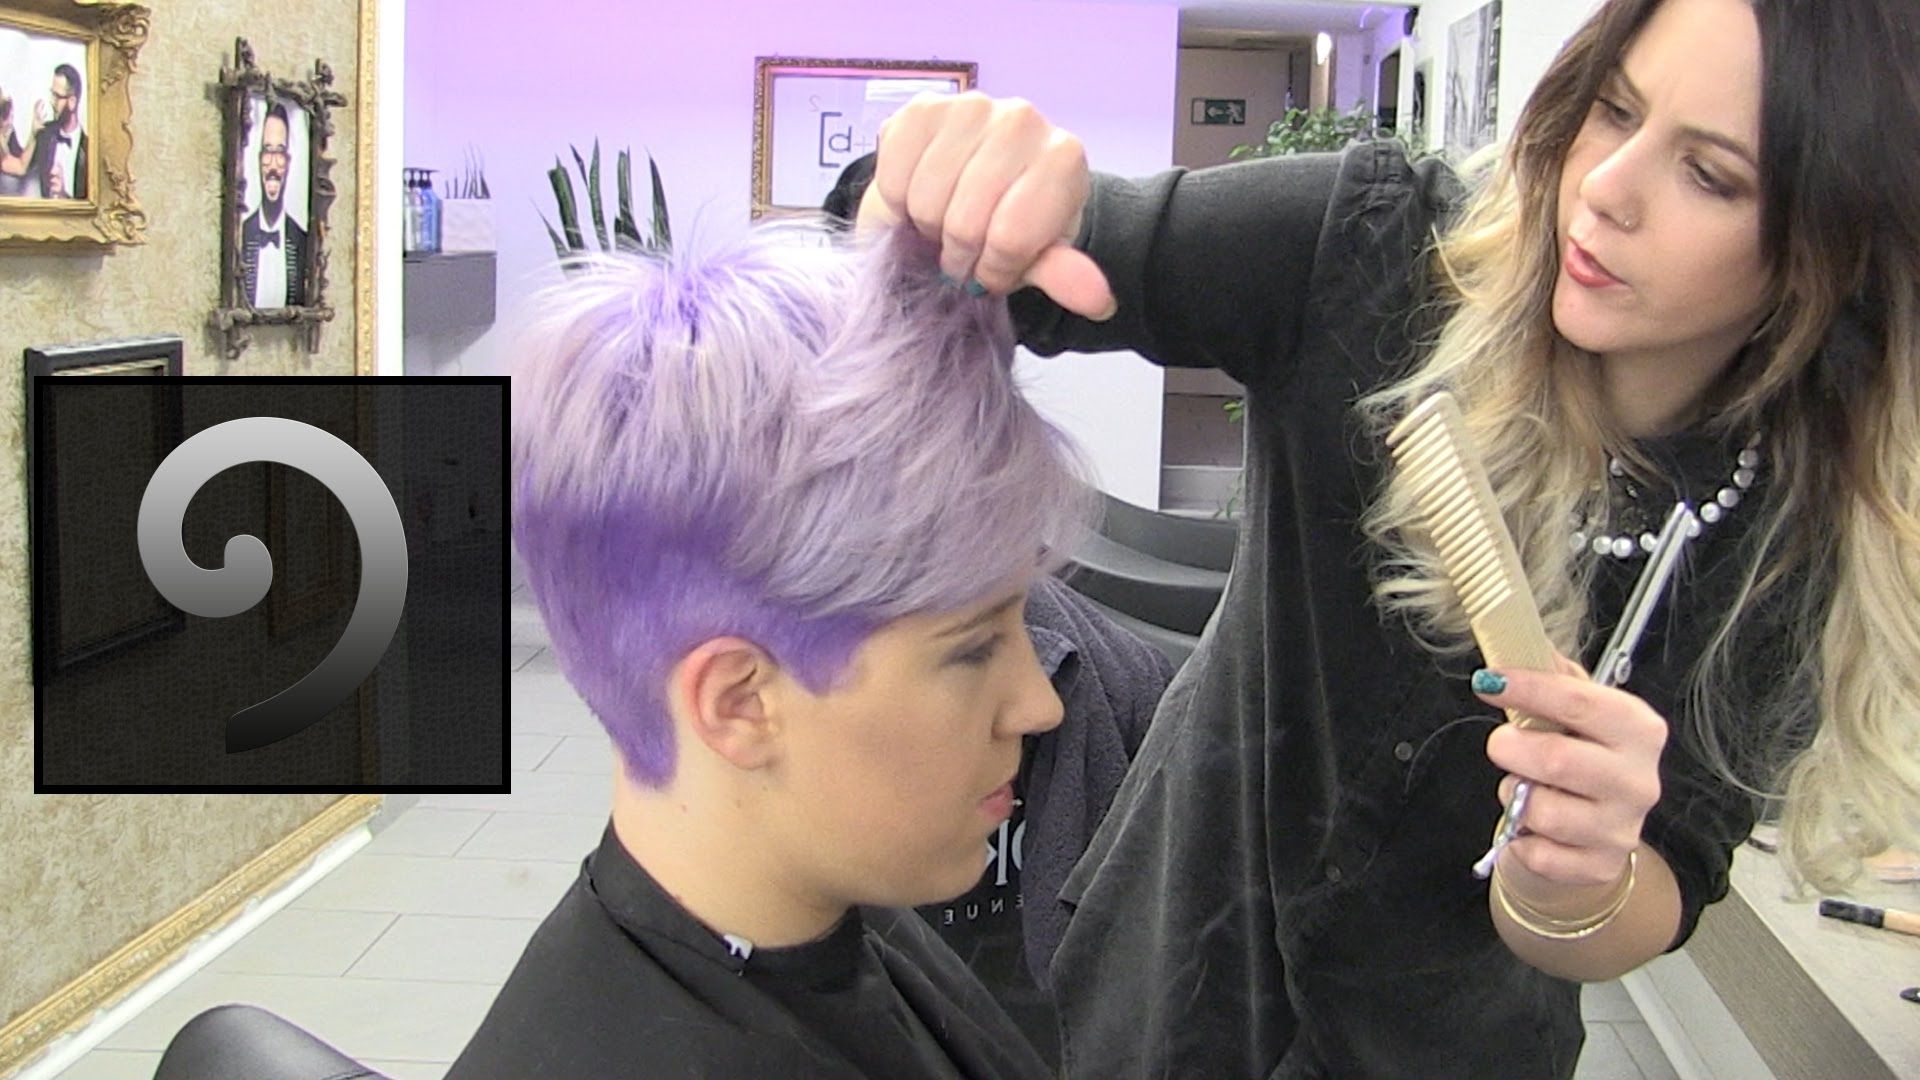 Short Pixie Hairtrend Undercut Extreme Haircut Makeover & Dying Pertaining To Current Lavender Pixie Bob Haircuts (View 9 of 15)